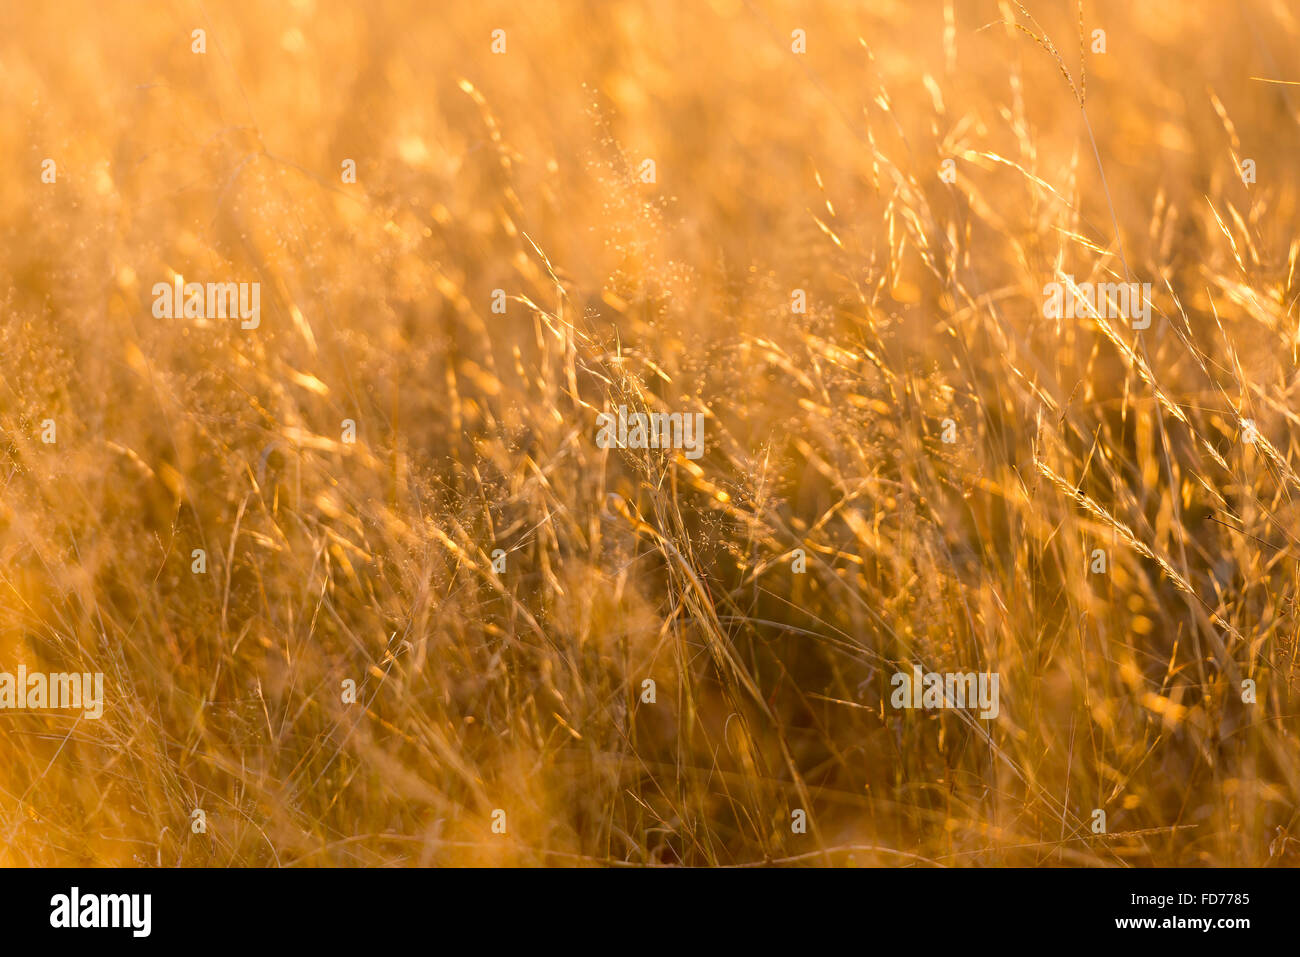 Grass in soft focus with shallow depth of field in golden sunset light Stock Photo